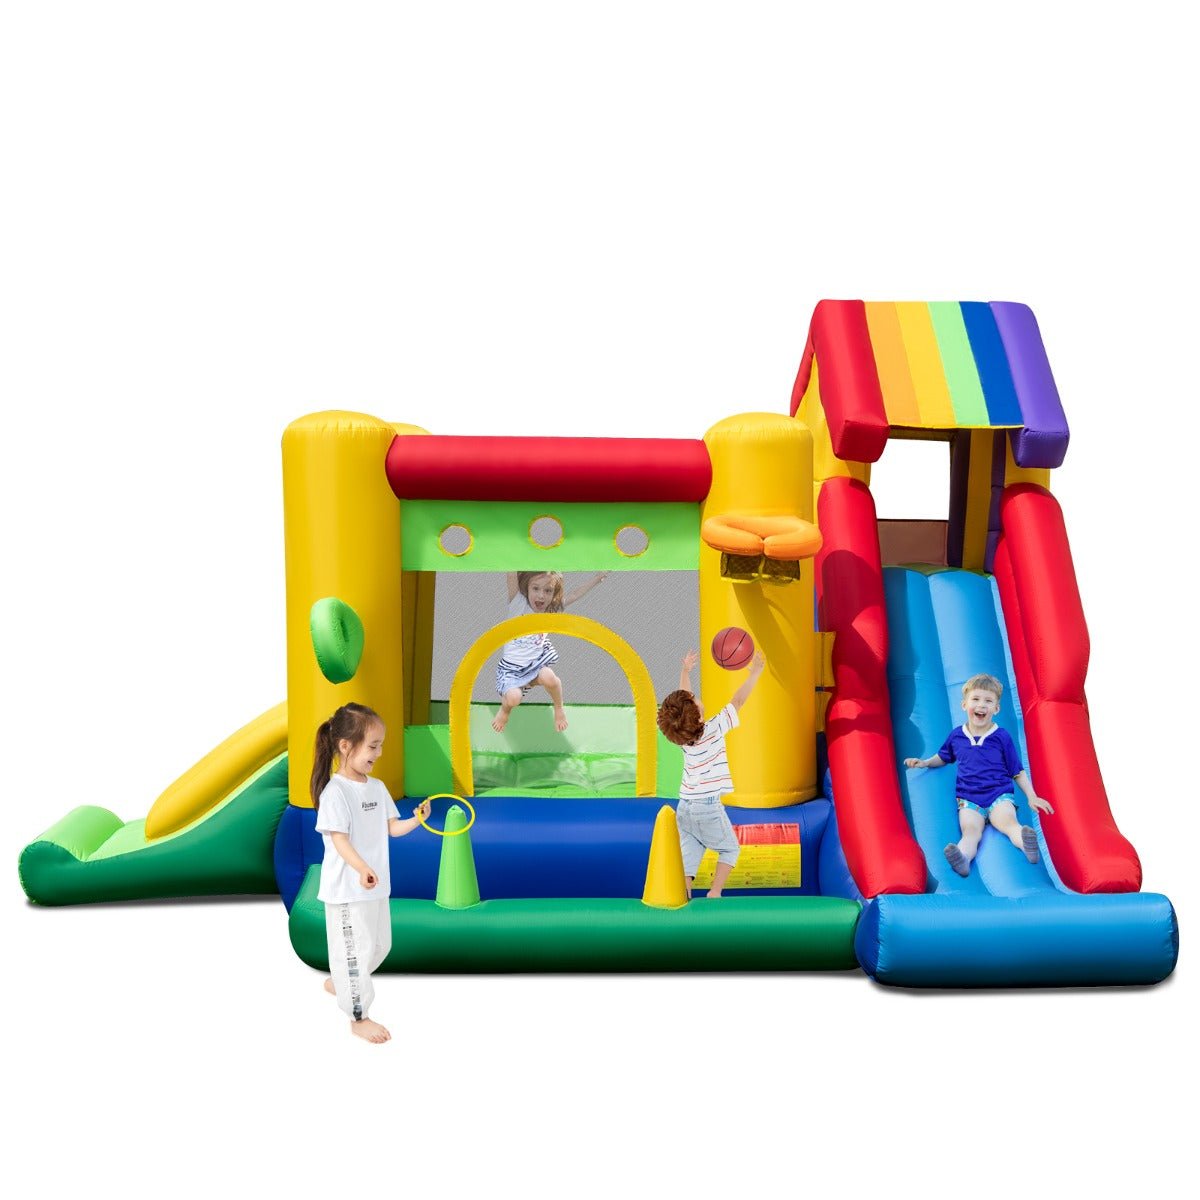 Experience Joy: 7-In-1 Inflatable Rainbow Castle with Slide